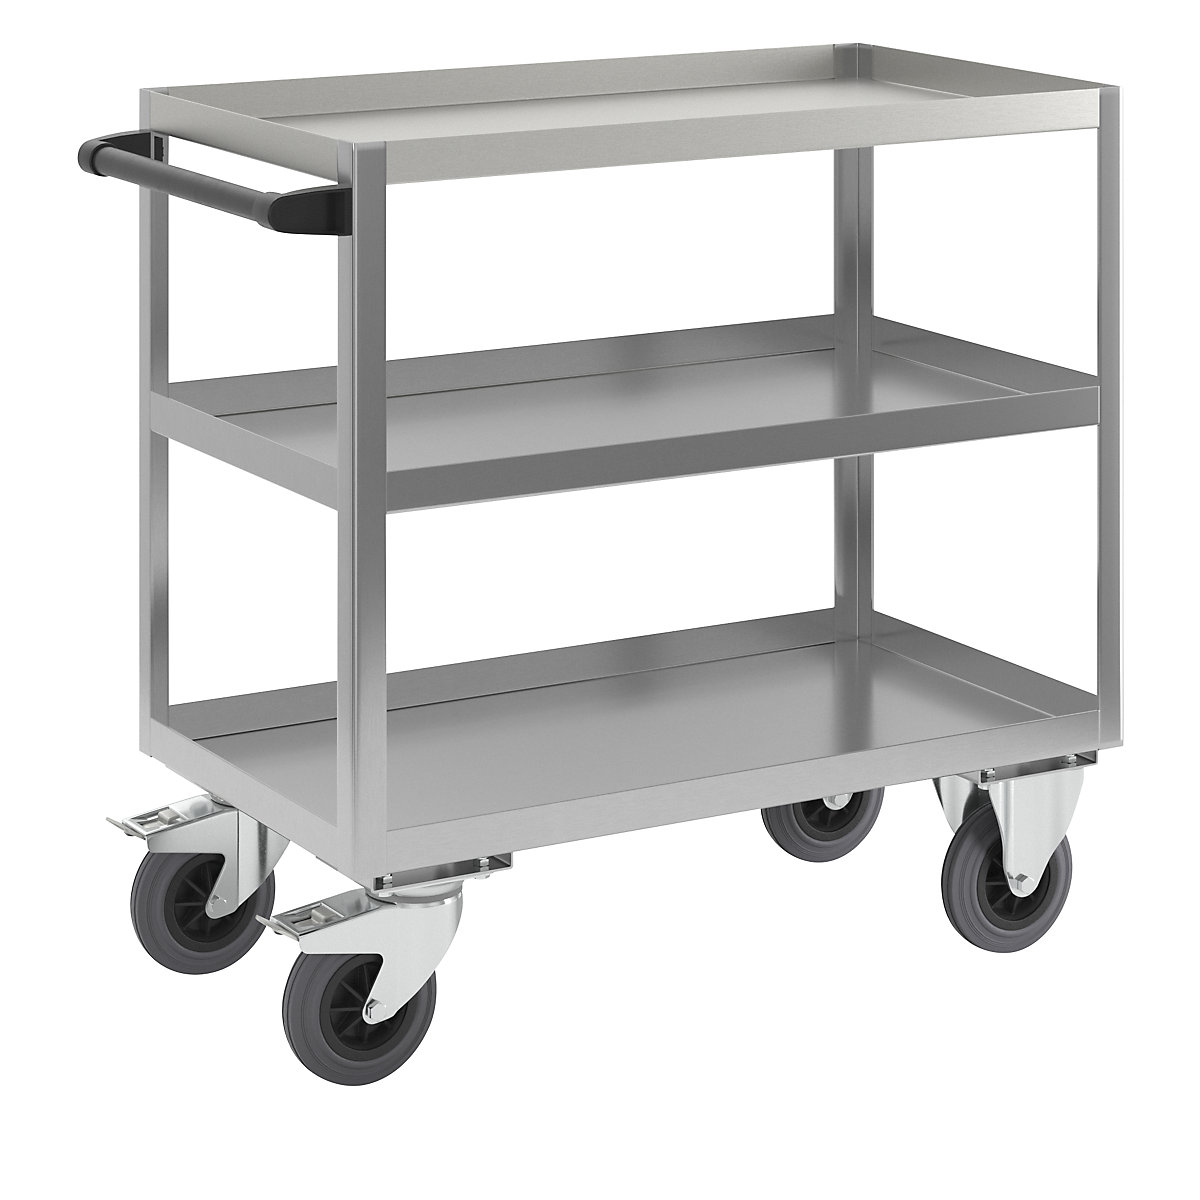 Stainless steel platform trolley – eurokraft pro, LxW 900 x 500 mm, overall height 915 mm, max. load 350 kg-1